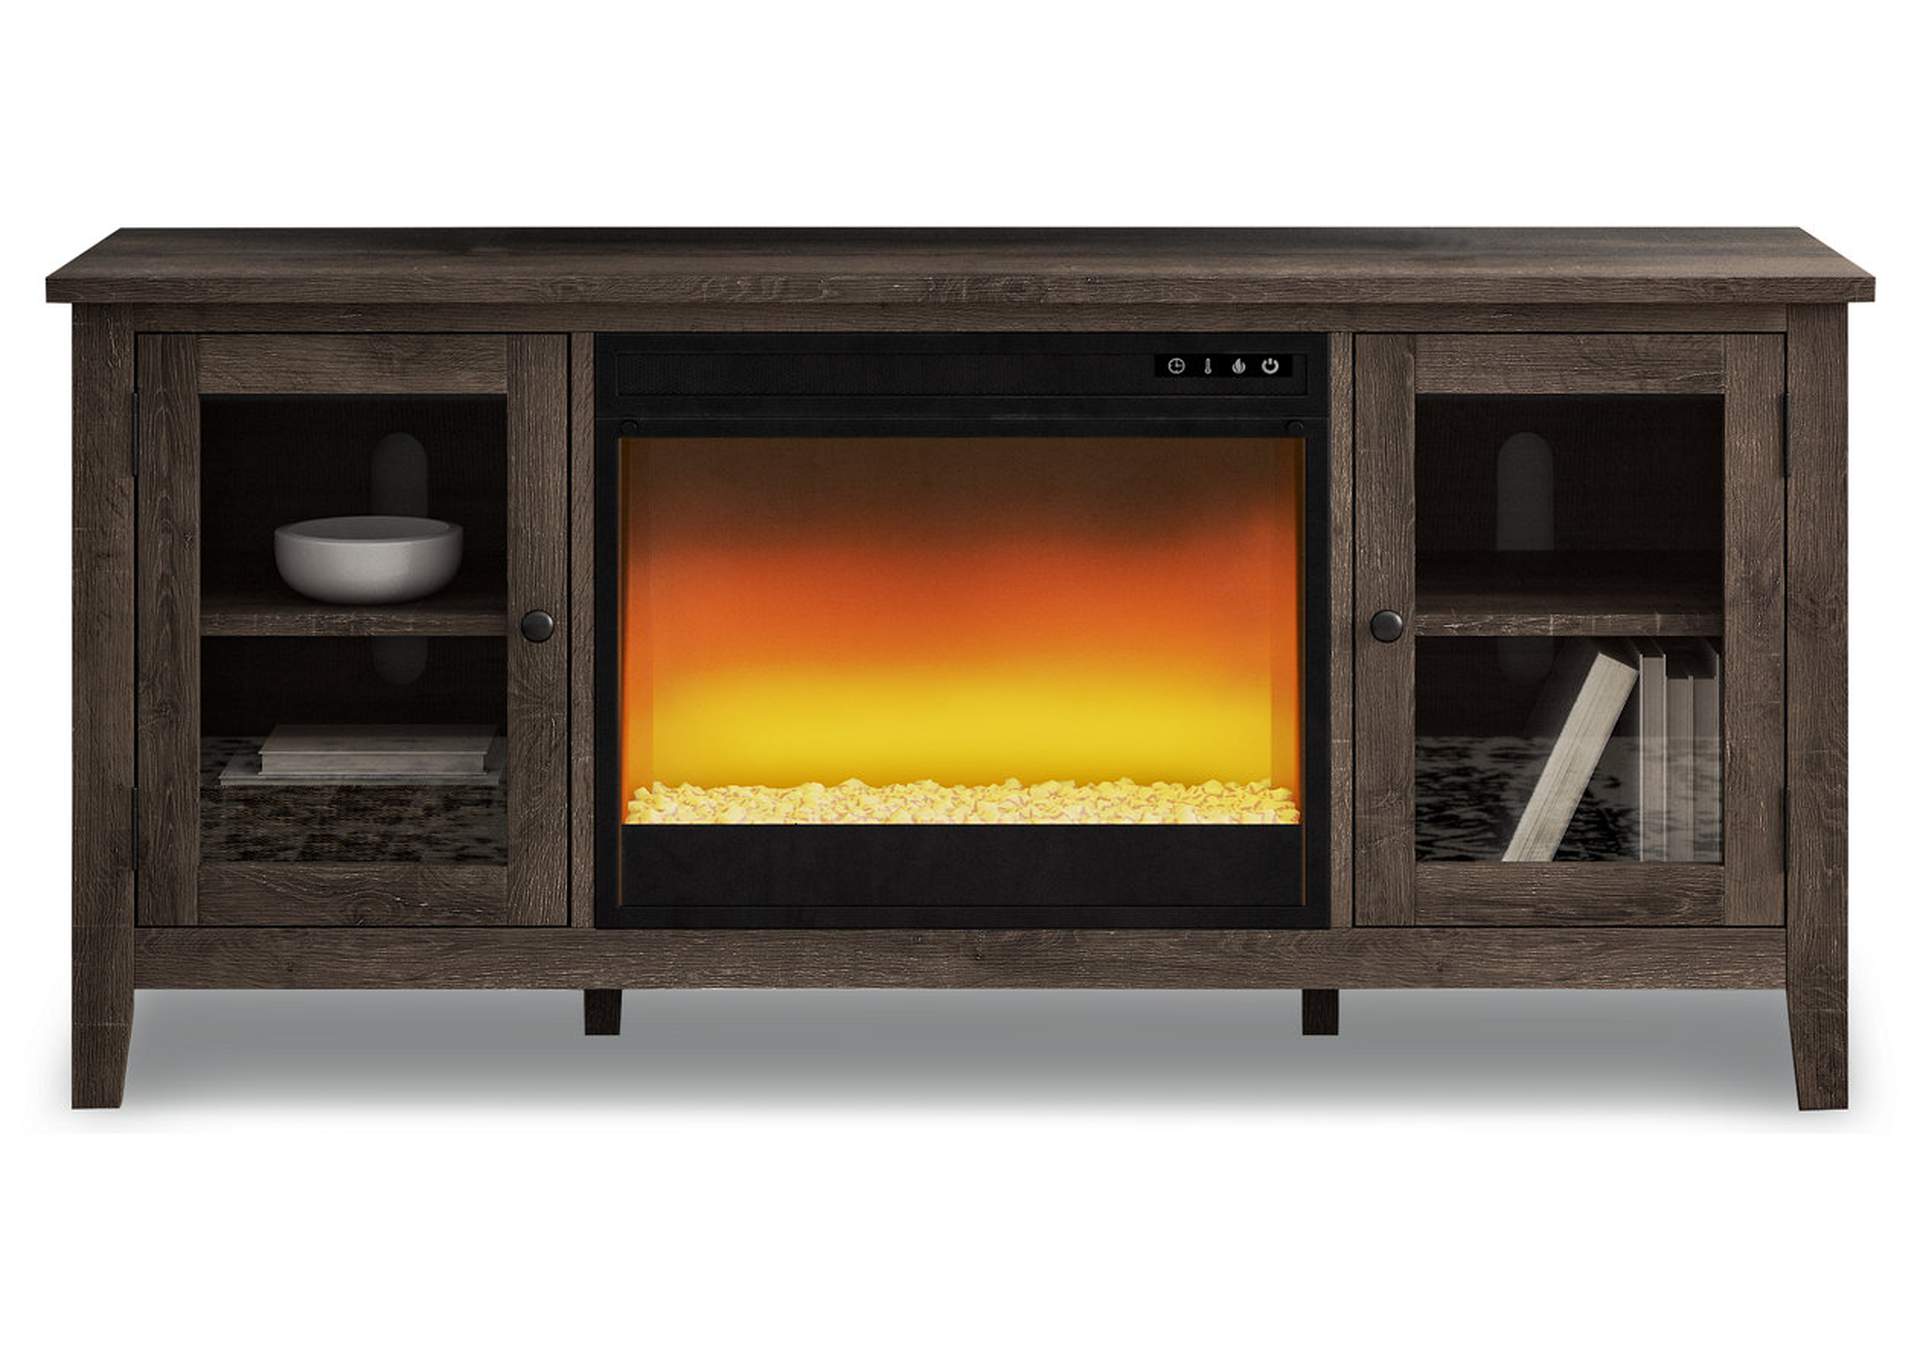 Arlenbry 60" TV Stand with Electric Fireplace,Signature Design By Ashley